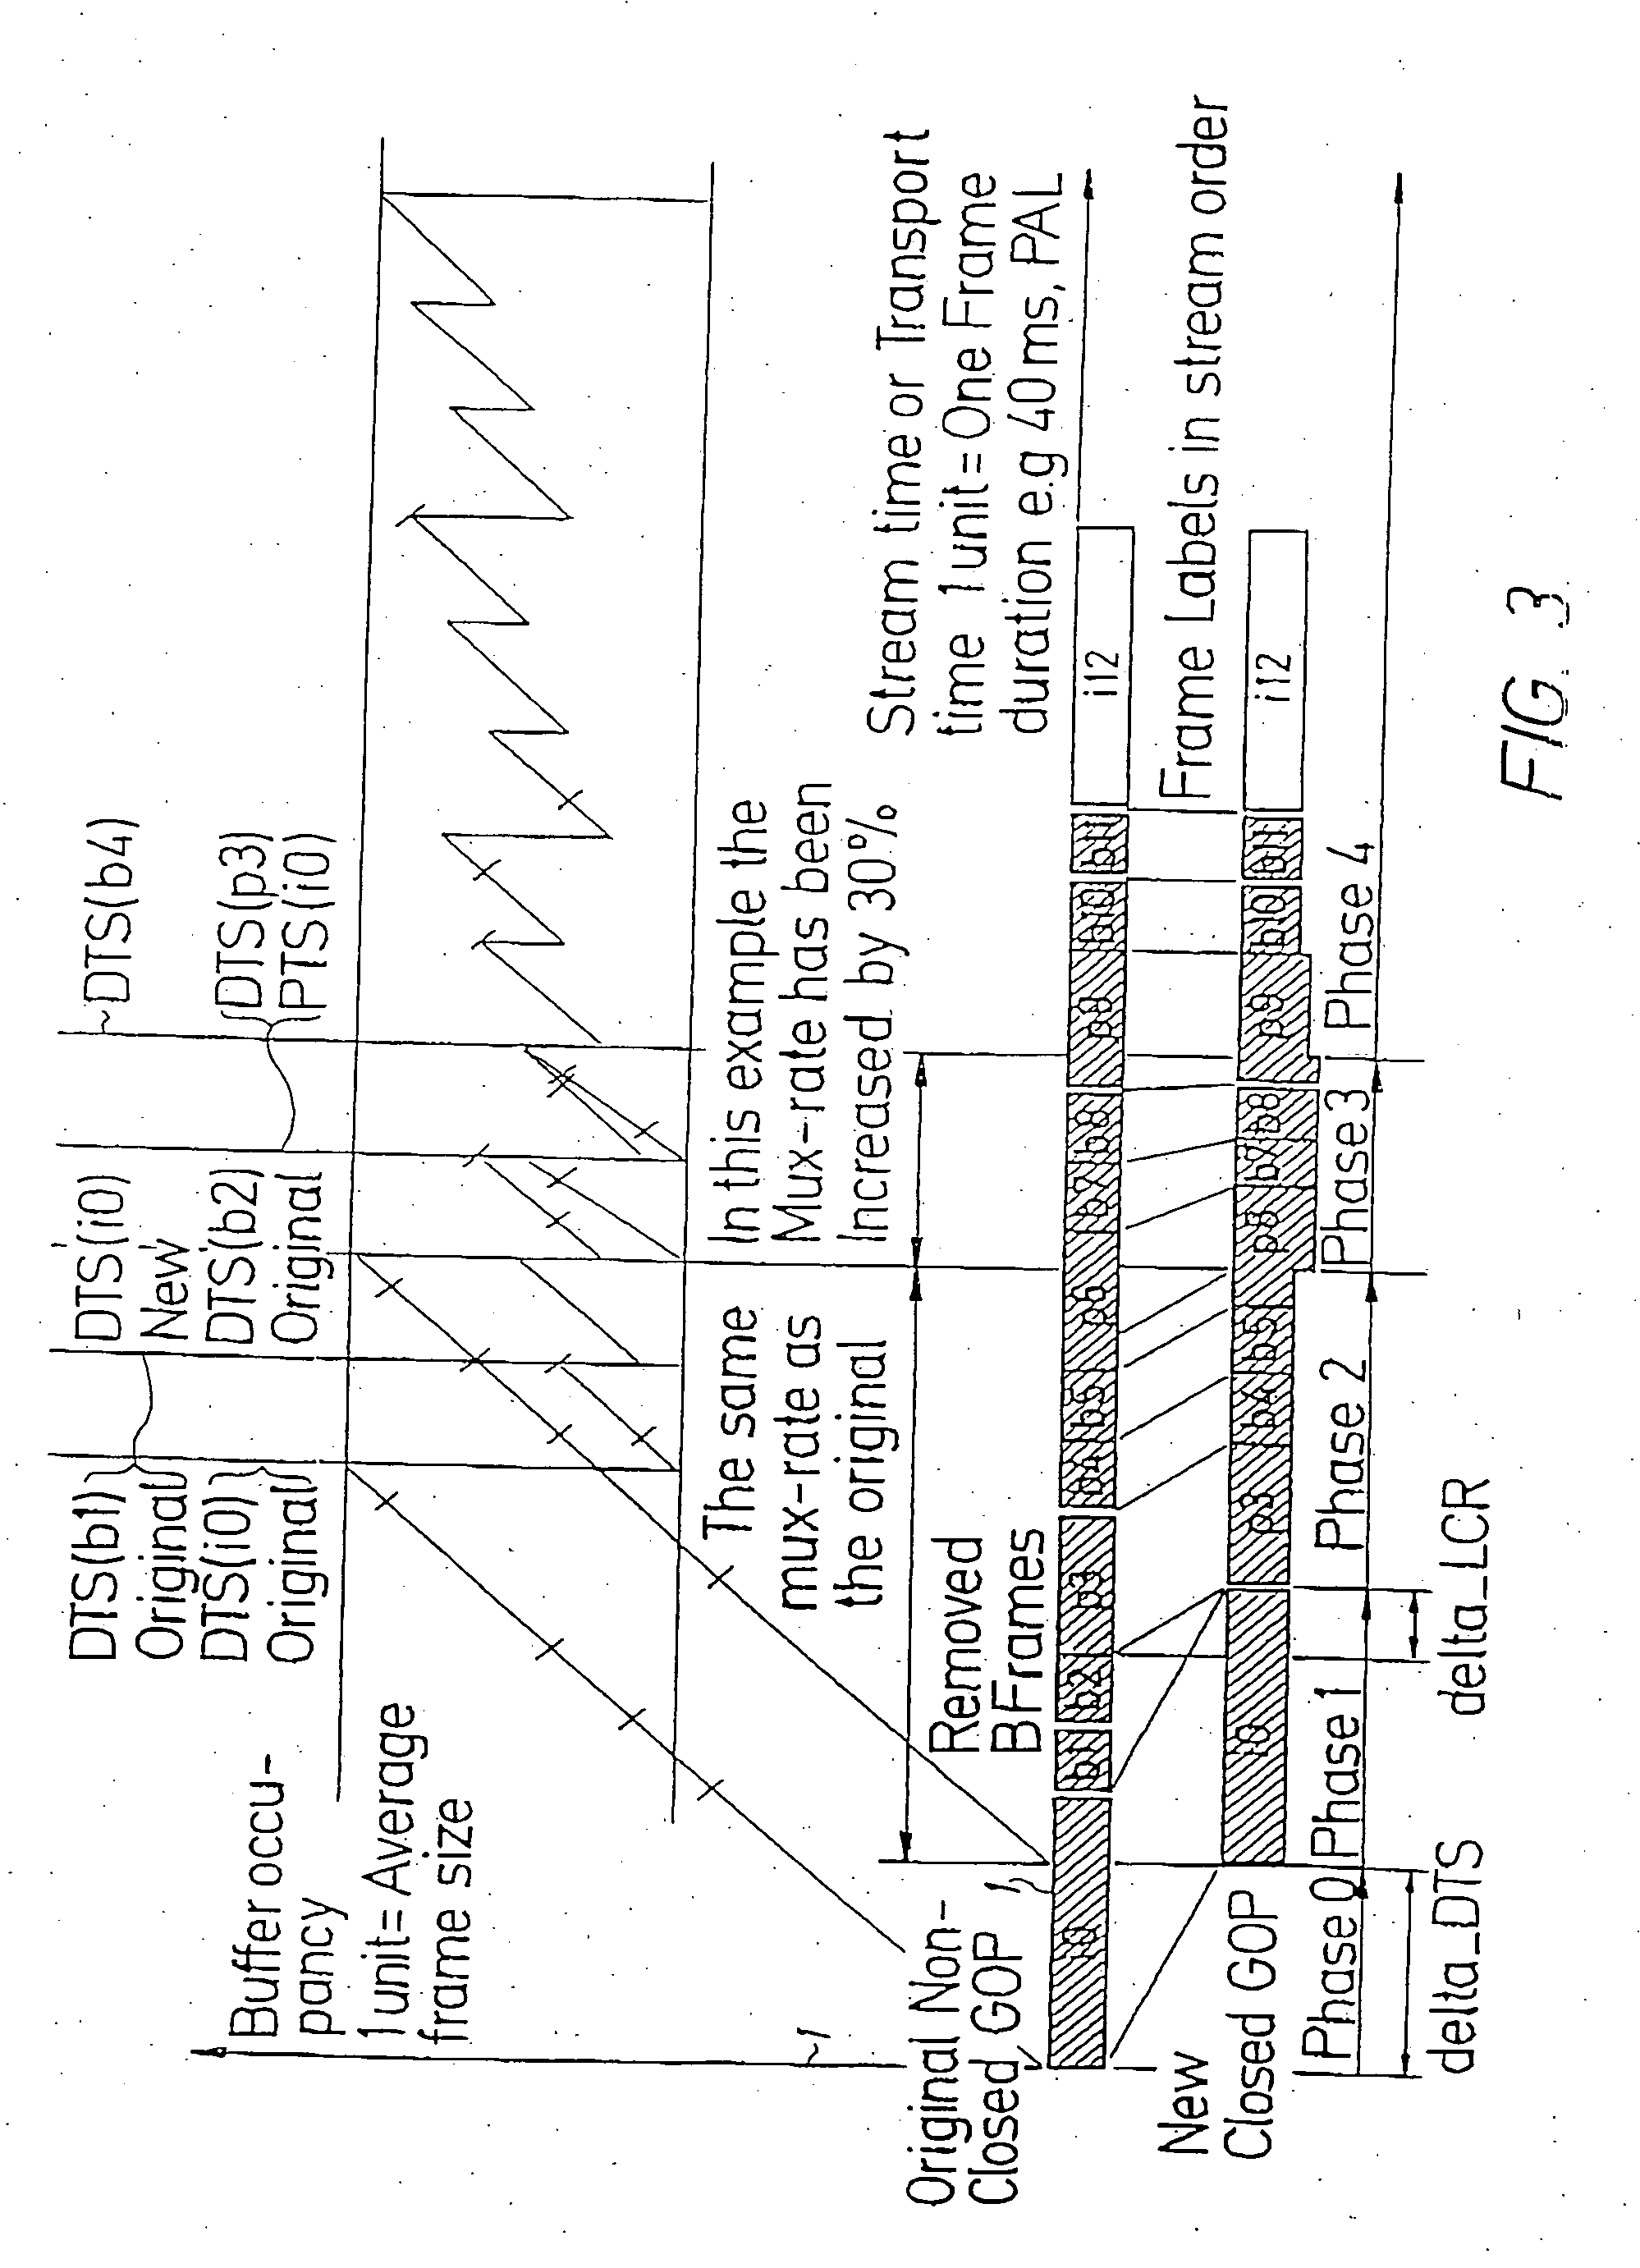 Method and apparatus for splicing